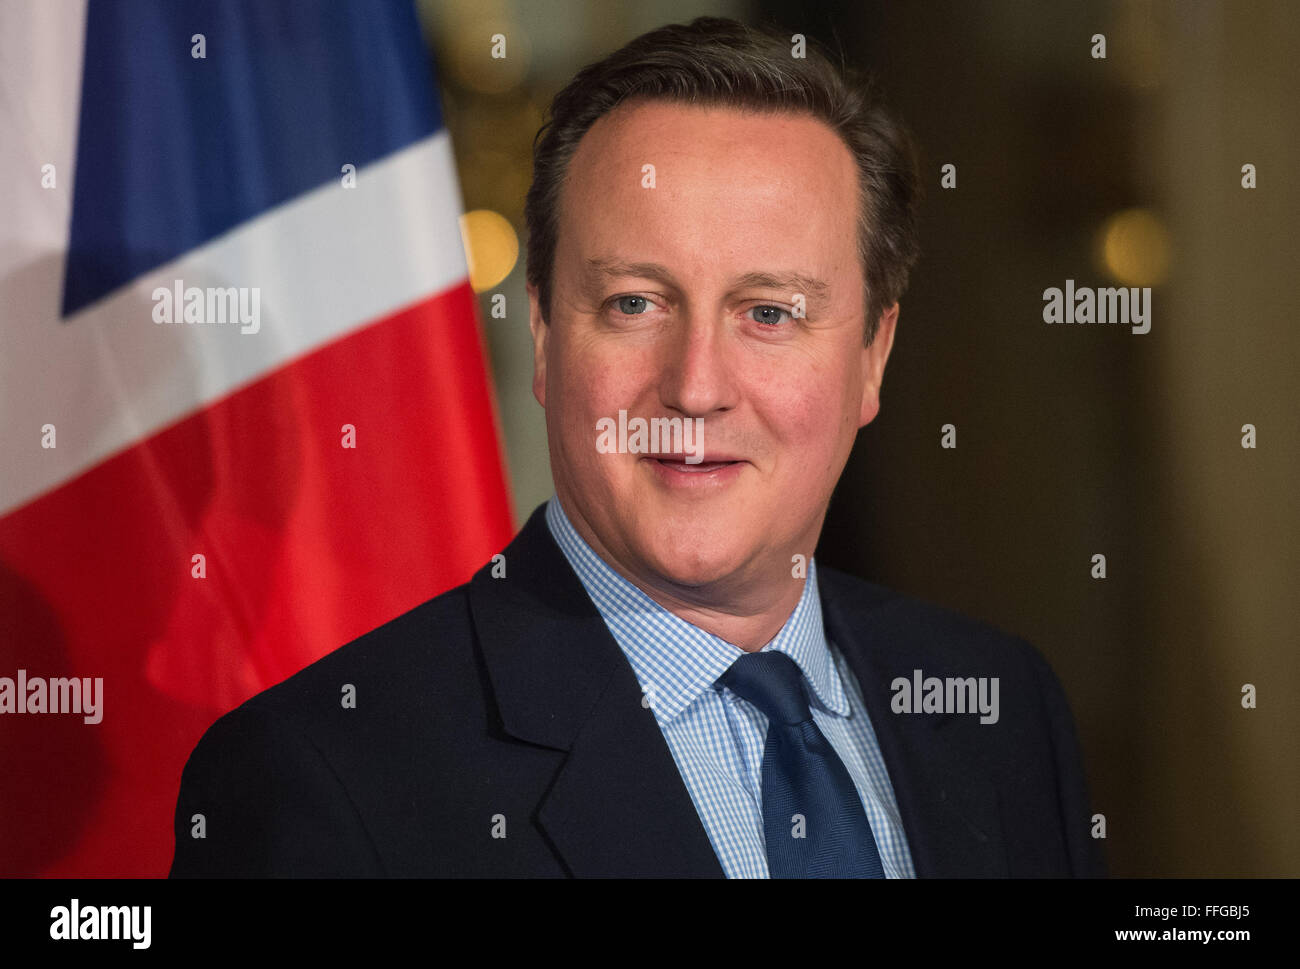 Hamburg, Germany. 12th Feb, 2016. Britain's Prime Minister David Cameron pictured in front of a British flag prior to the annual Matthiae dinner at the city hall of Hamburg, Germany, 12 February 2016. Britain's Prime Minister David Cameron and German Chancellor Angela Merkel are guests of honour at the oldest feast in the world. Since 1356, the leaders of the Hansa city invite distinguished guests to the Matthiae dinner. Photo: LUKAS SCHULZE/dpa/Alamy Live News Stock Photo